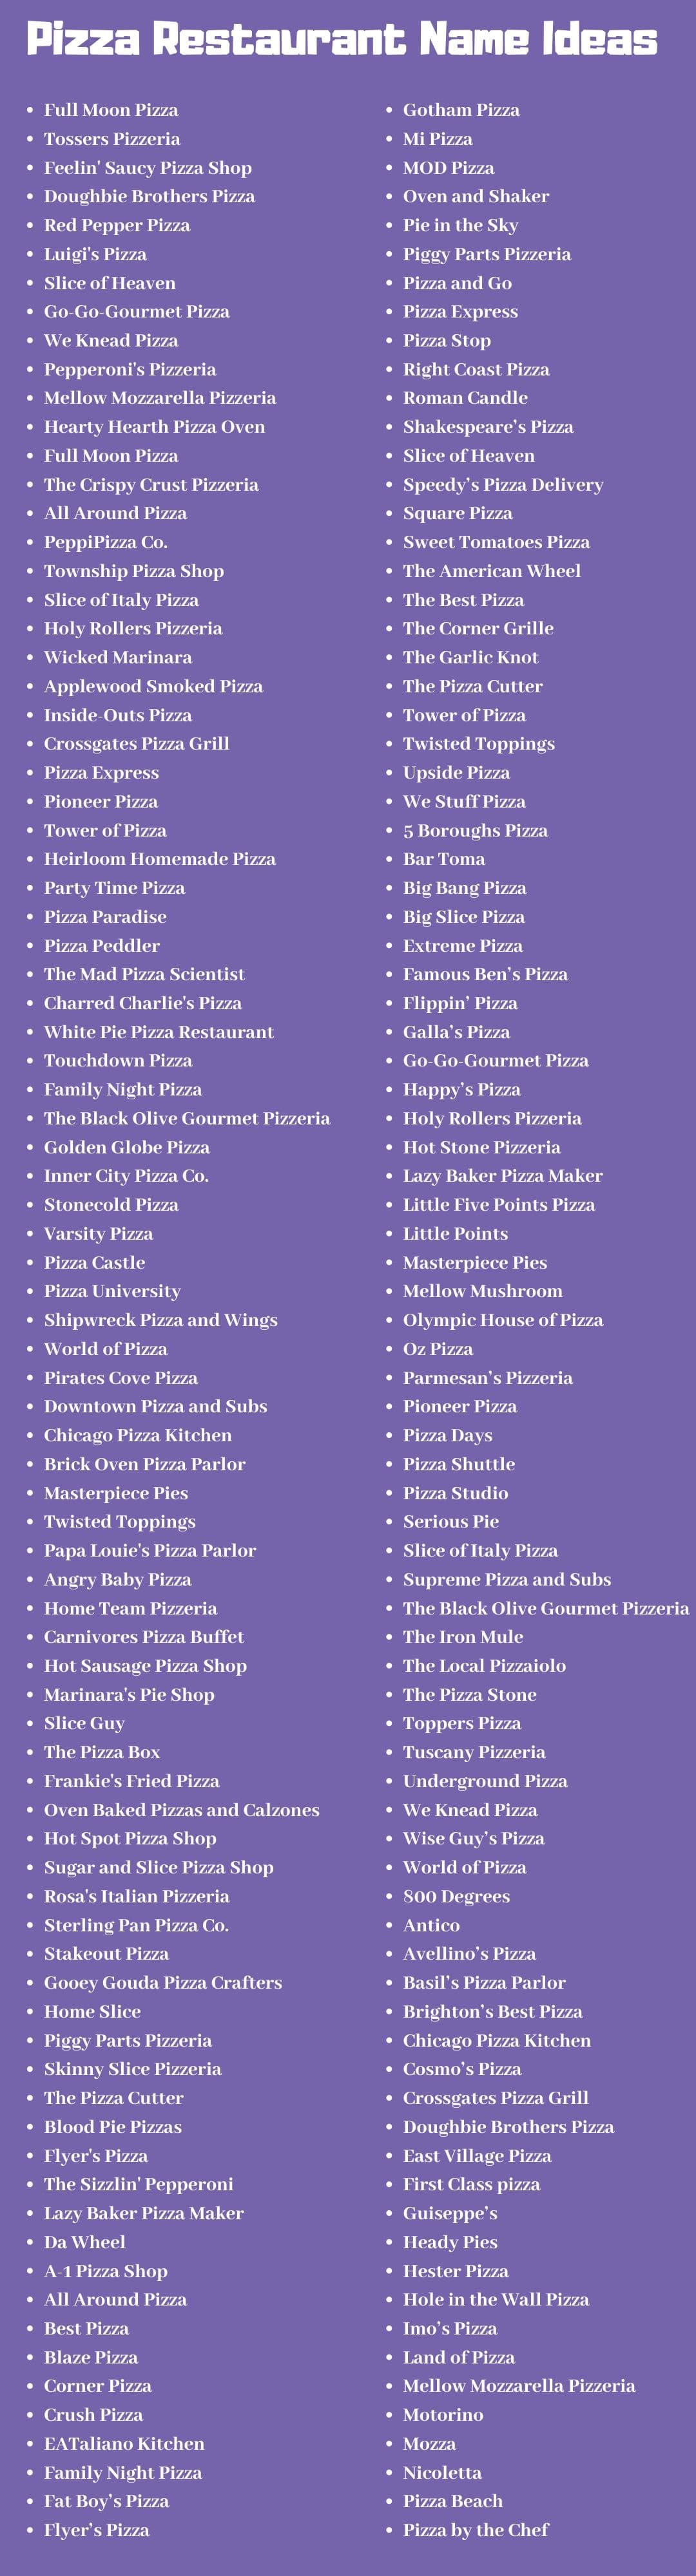 370+ Pizza Restaurant Name Ideas and Suggestions